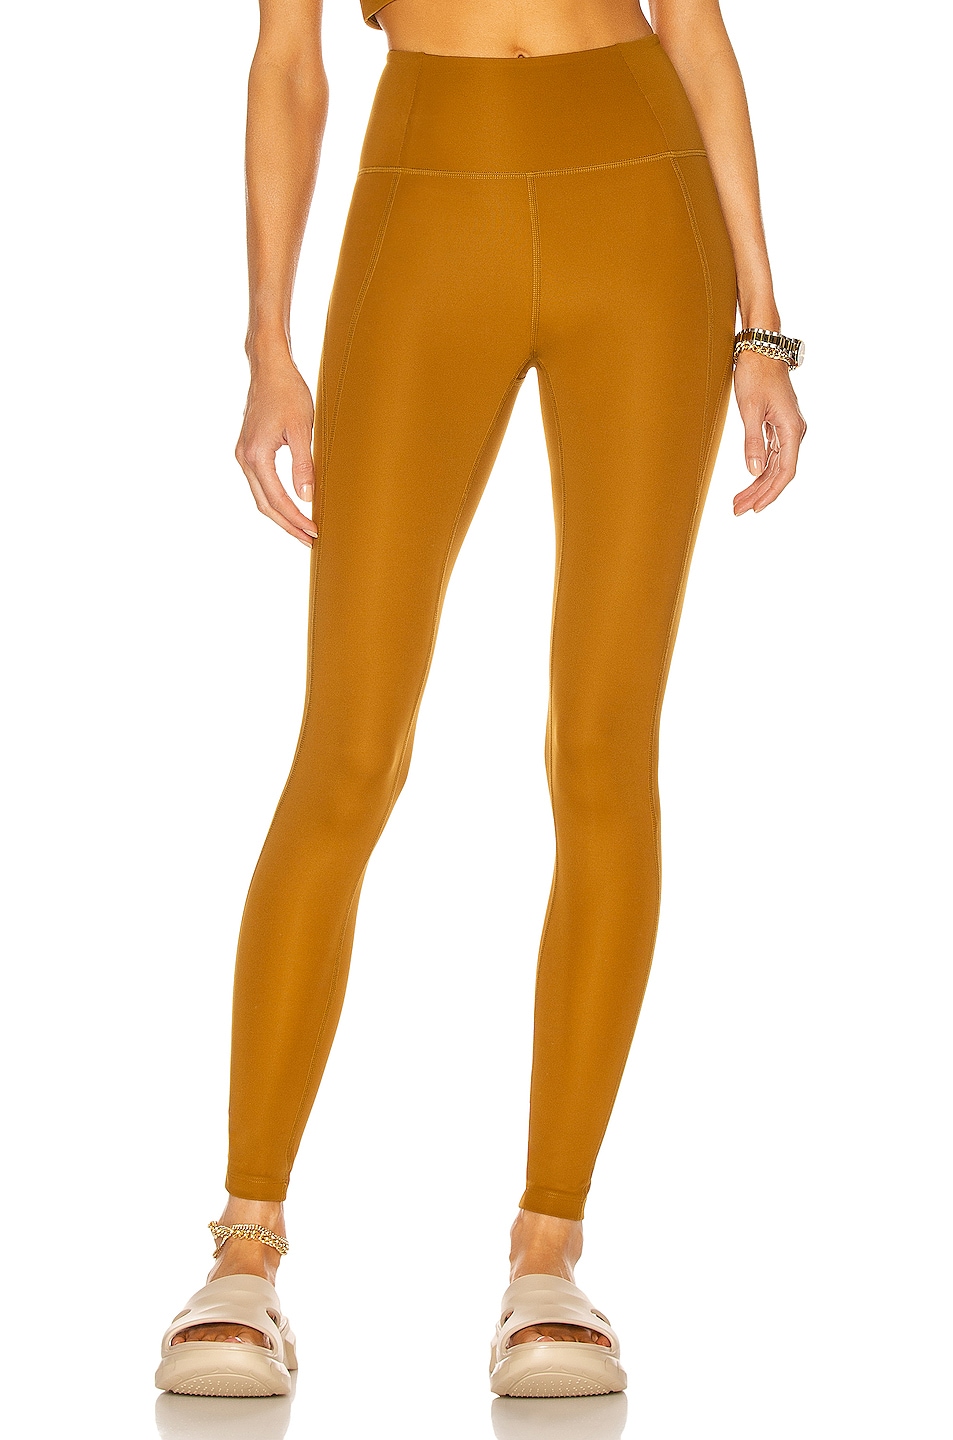 Image 1 of Girlfriend Collective High-Rise Compressive Legging in Saddle